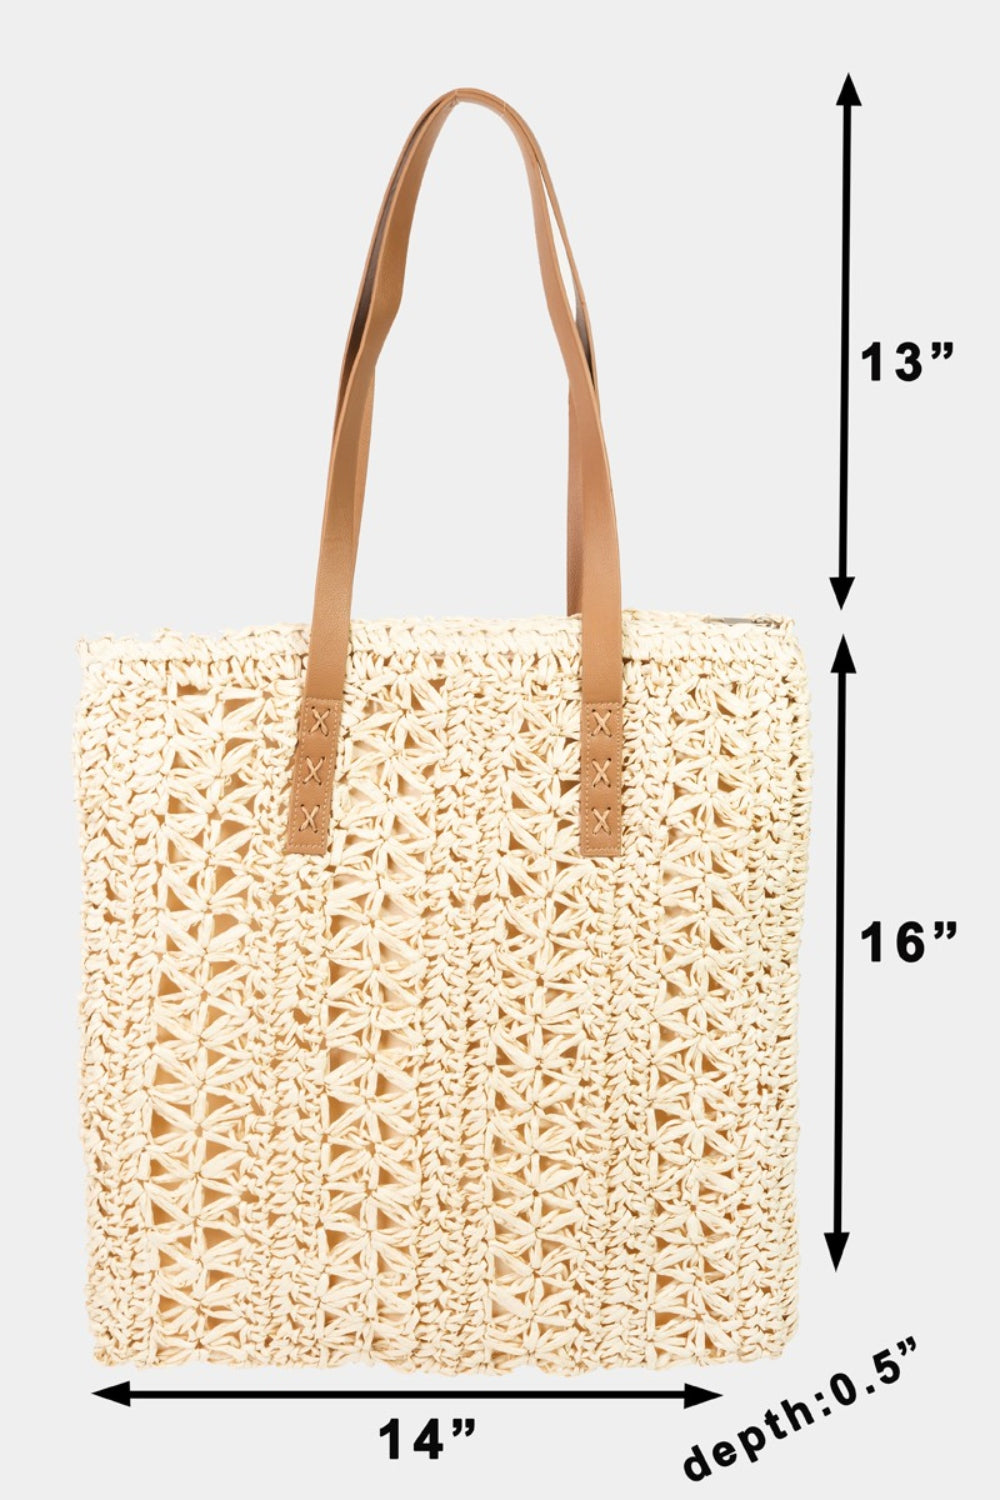 Fame Straw Braided Tote Bag - 2 Colors